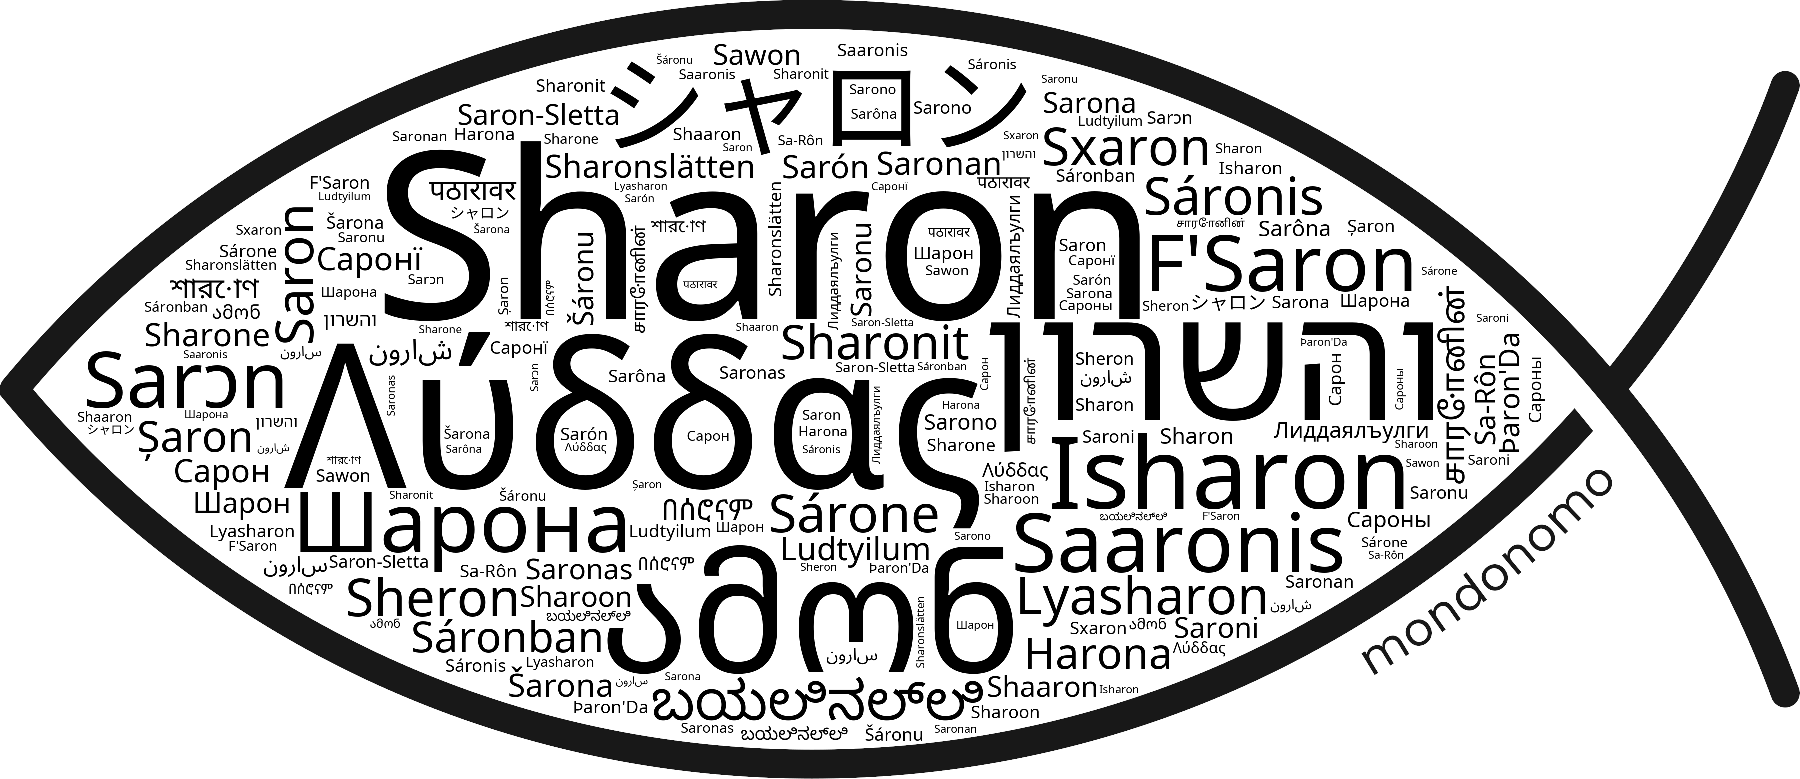 Name Sharon in the world's Bibles